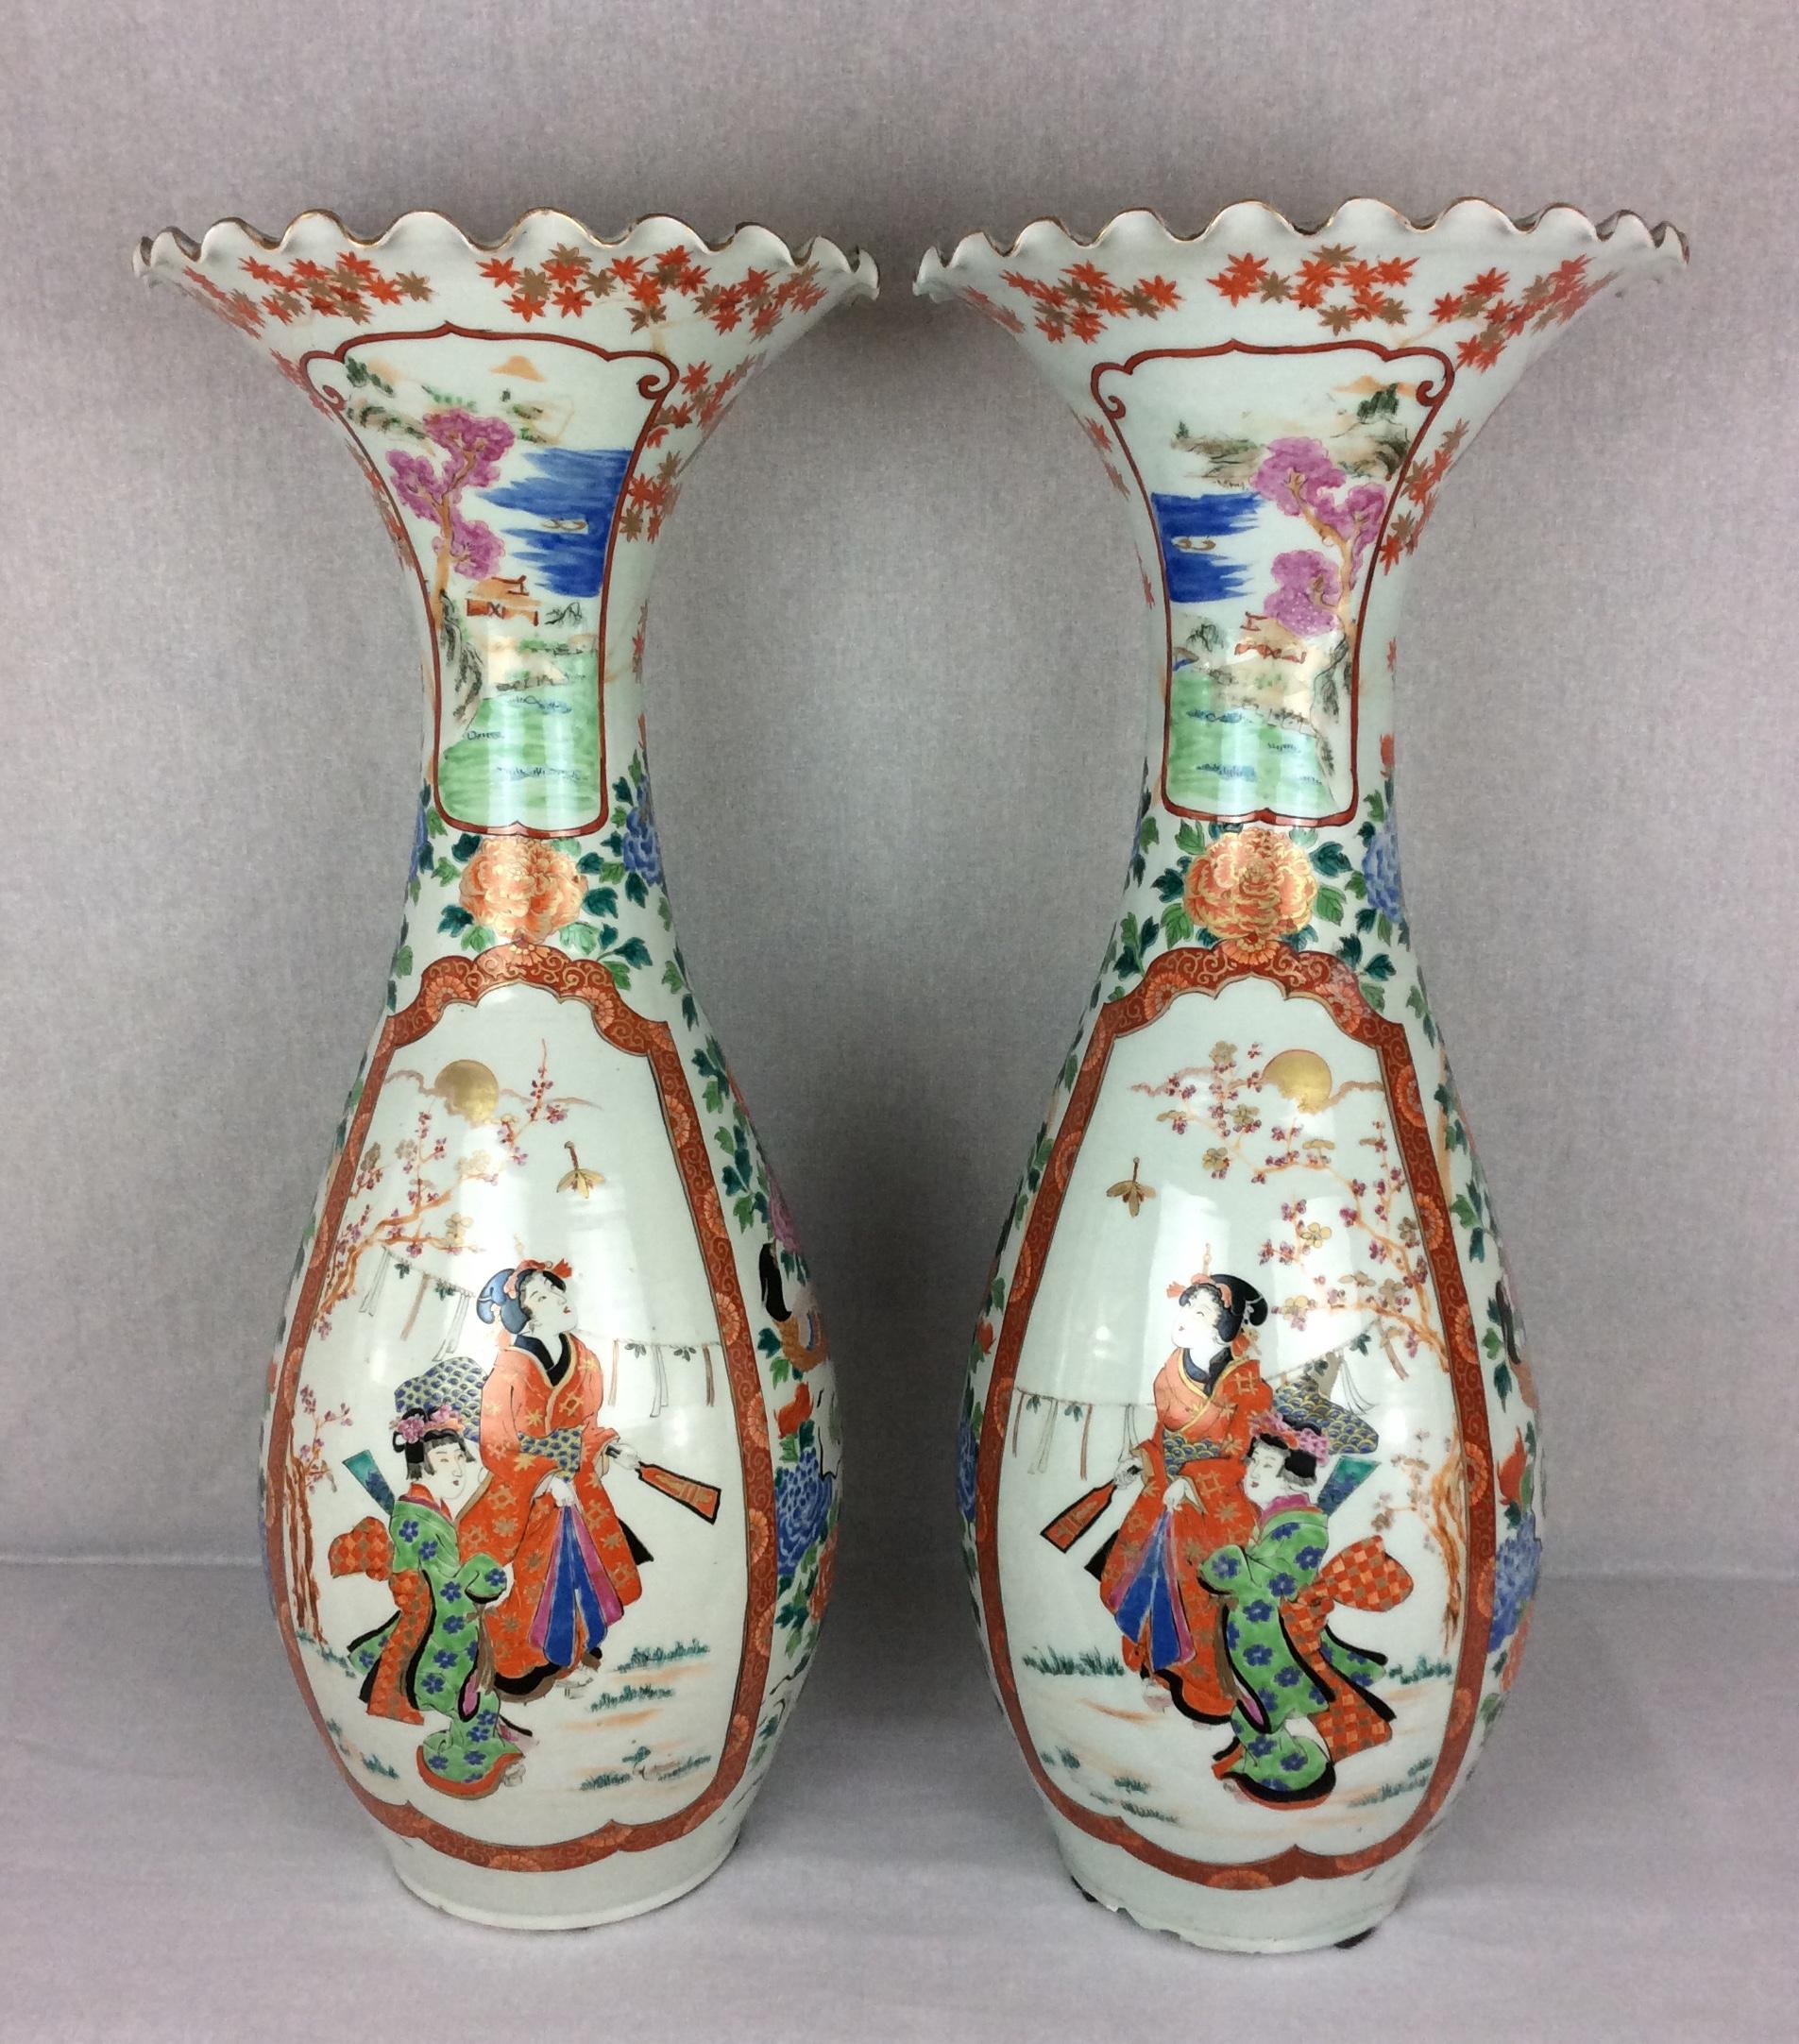 Pair of antique Japanese floriform trumpet floor vases in Imari porcelain, Meiji Period, circa 1900.
These beautiful Japanese floriform trumpet floor vases are adorned in polychrome enamels with birds, flowers and traditional Japanese decoration.